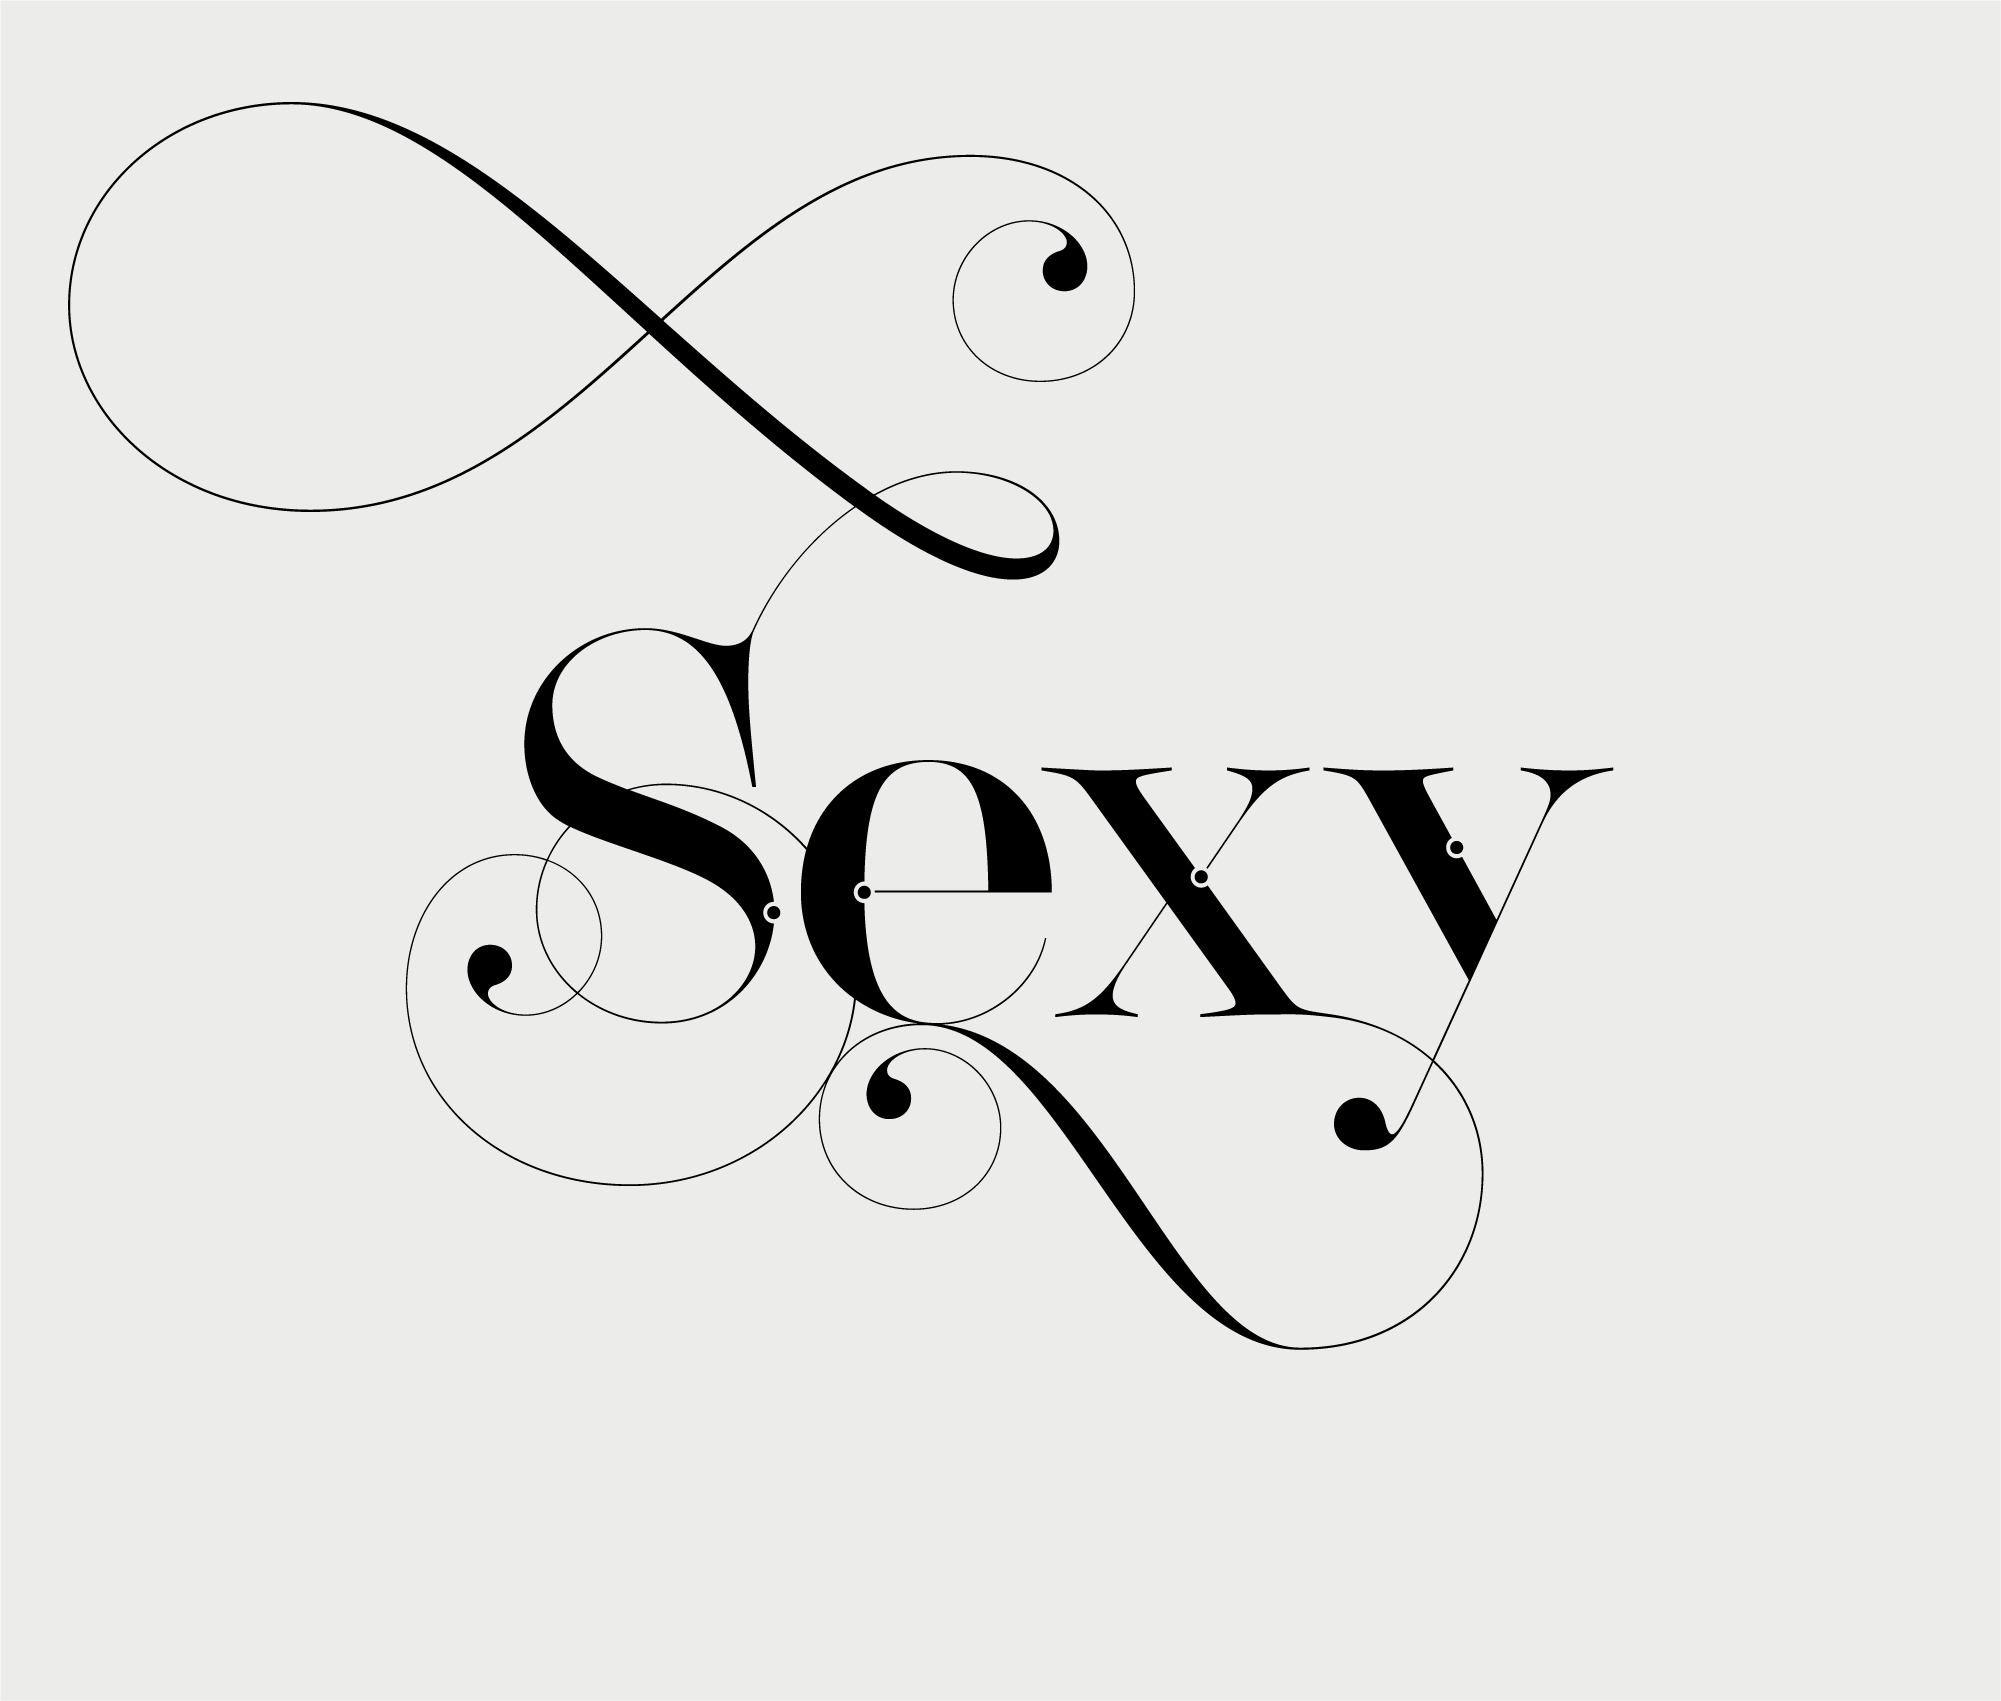 Lingerie Typeface, Sexy fonts, Sexy Typeface, Sexy Typography, Fashion Fonts, Fashion Typeface, Fashion Typography, Segol Typeface, Vogue fonts, Must have fonts 2023, Best fonts 2023, Fashion magazines fonts